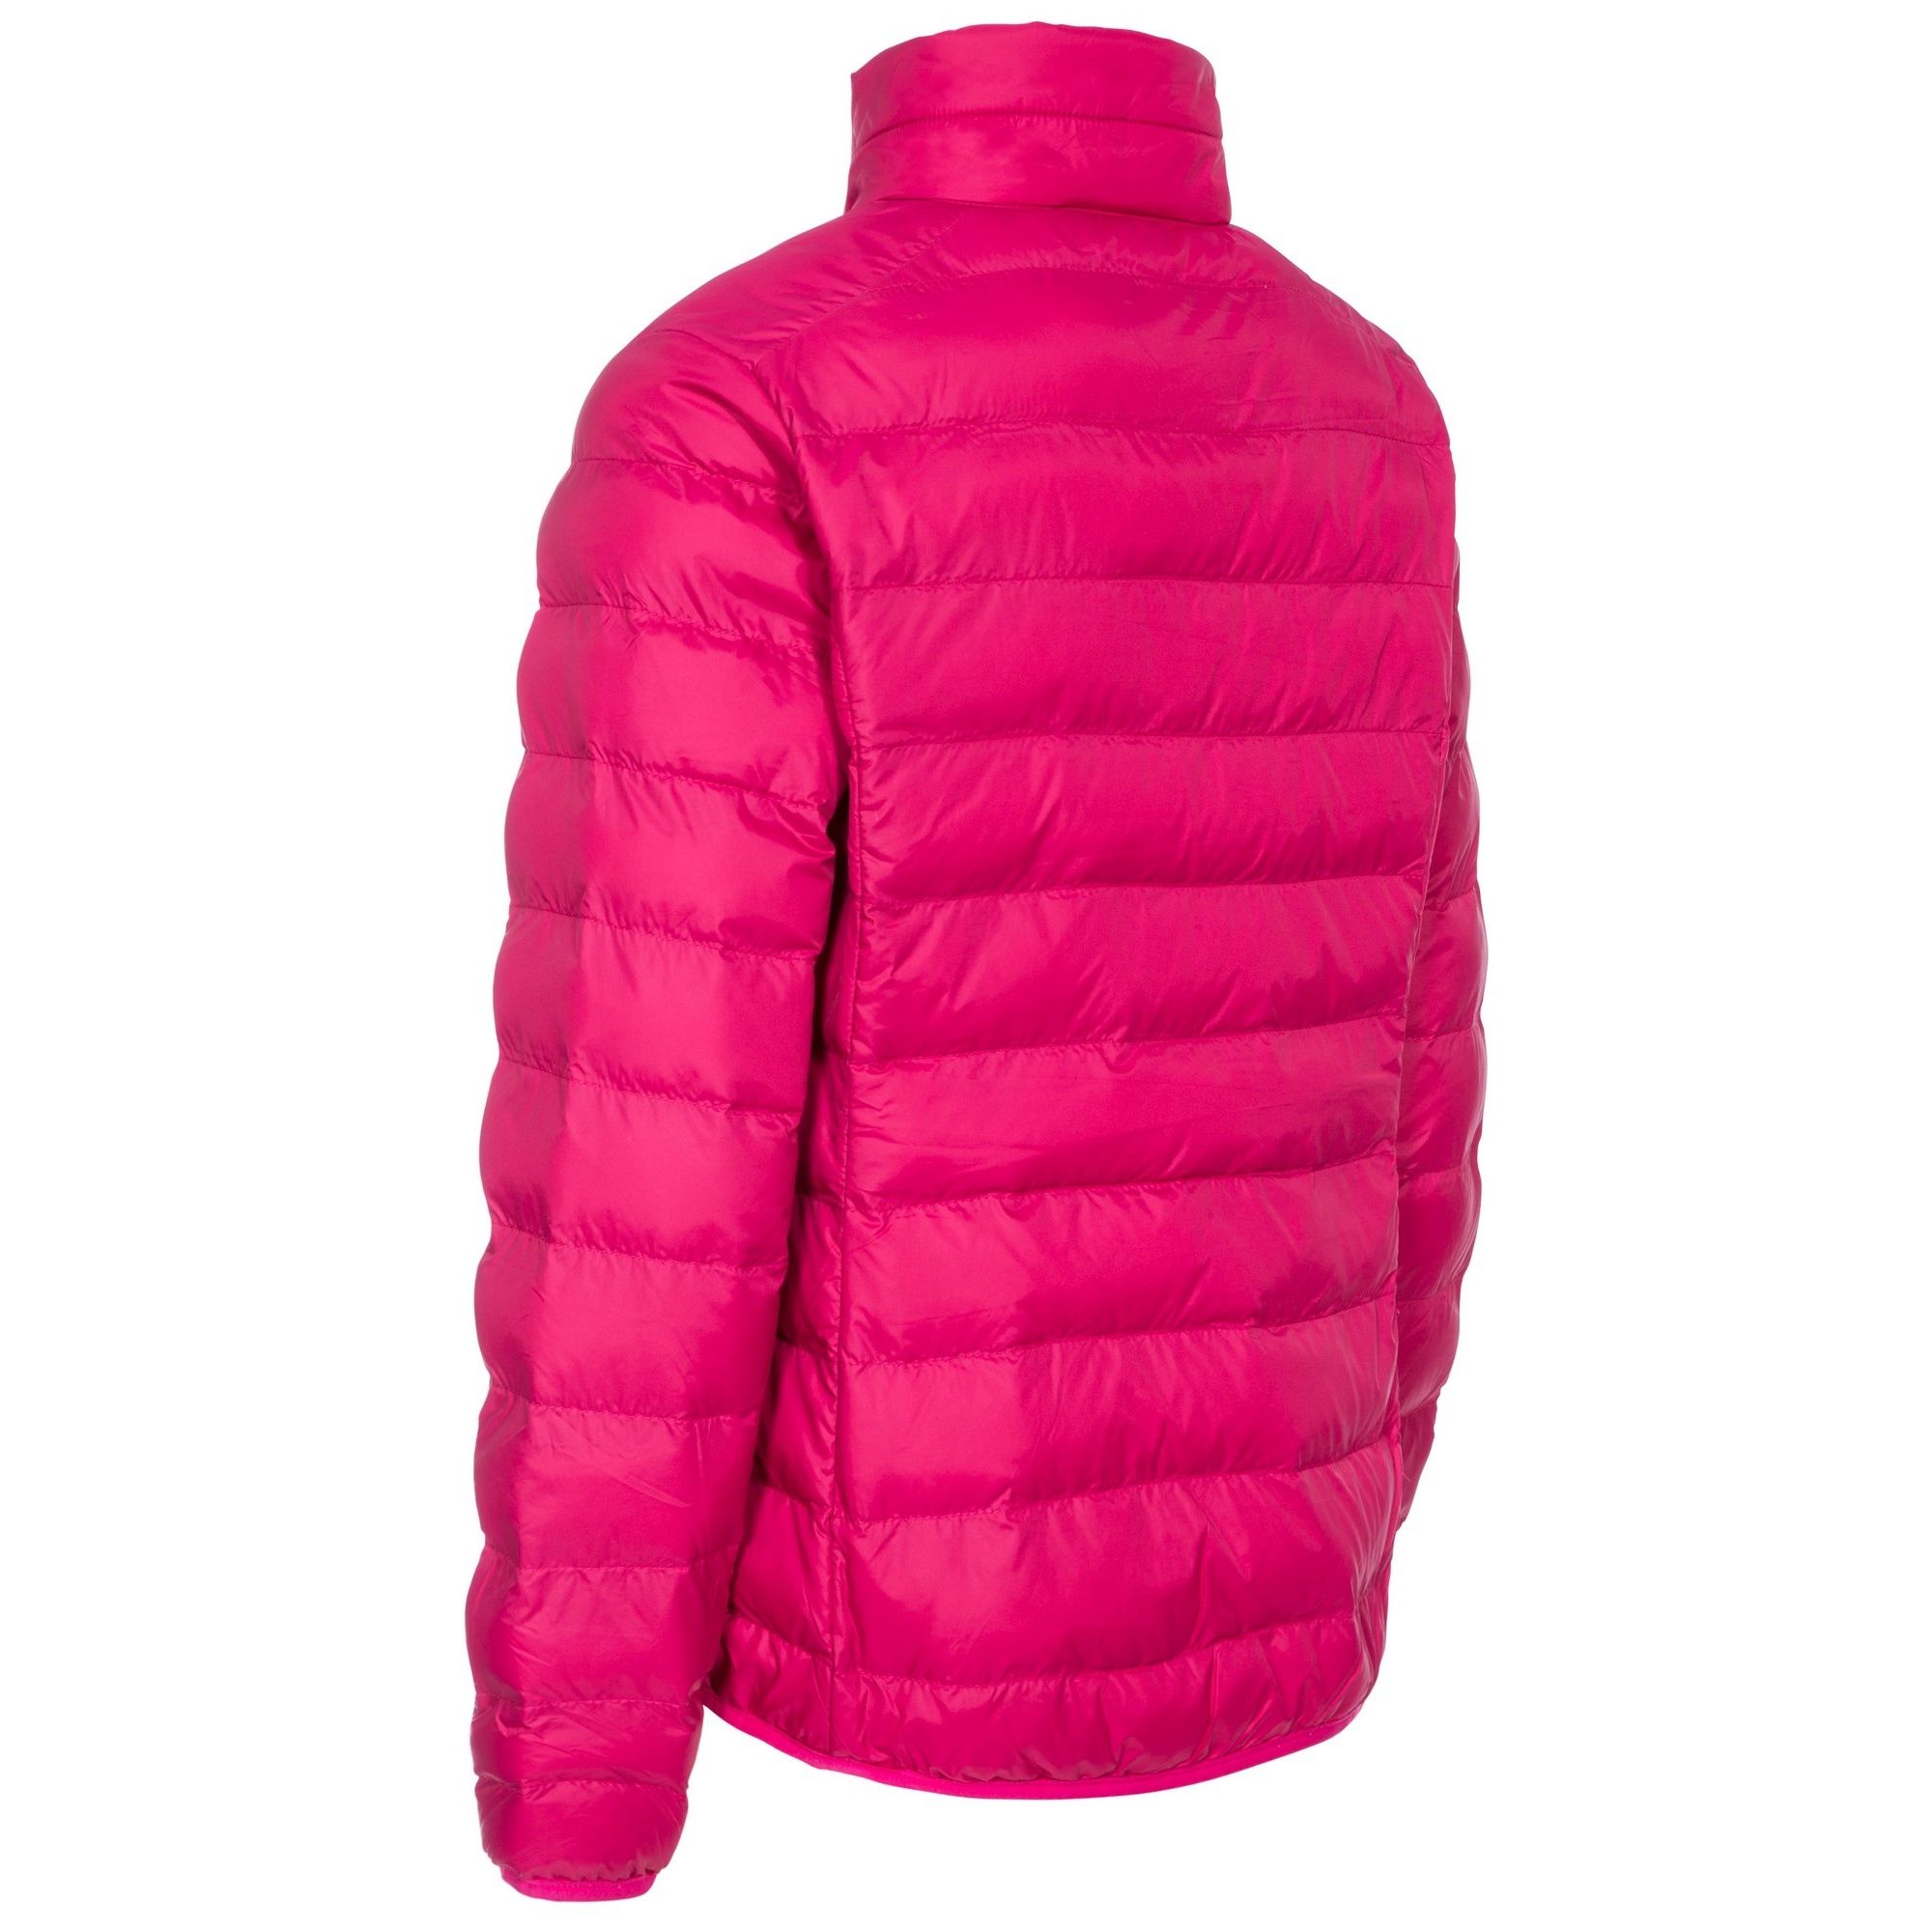 Ultra lightweight jacket. Low profile, contrast zips. Down touch padding. Jacket packs away into stuff sack. Inner storm flap. Chin guard. Shell: 100% Polyamide, Lining: 100% Polyester, Filling: 100% Polyester. Trespass Womens Chest Sizing (approx): XS/8 - 32in/81cm, S/10 - 34in/86cm, M/12 - 36in/91.4cm, L/14 - 38in/96.5cm, XL/16 - 40in/101.5cm, XXL/18 - 42in/106.5cm.